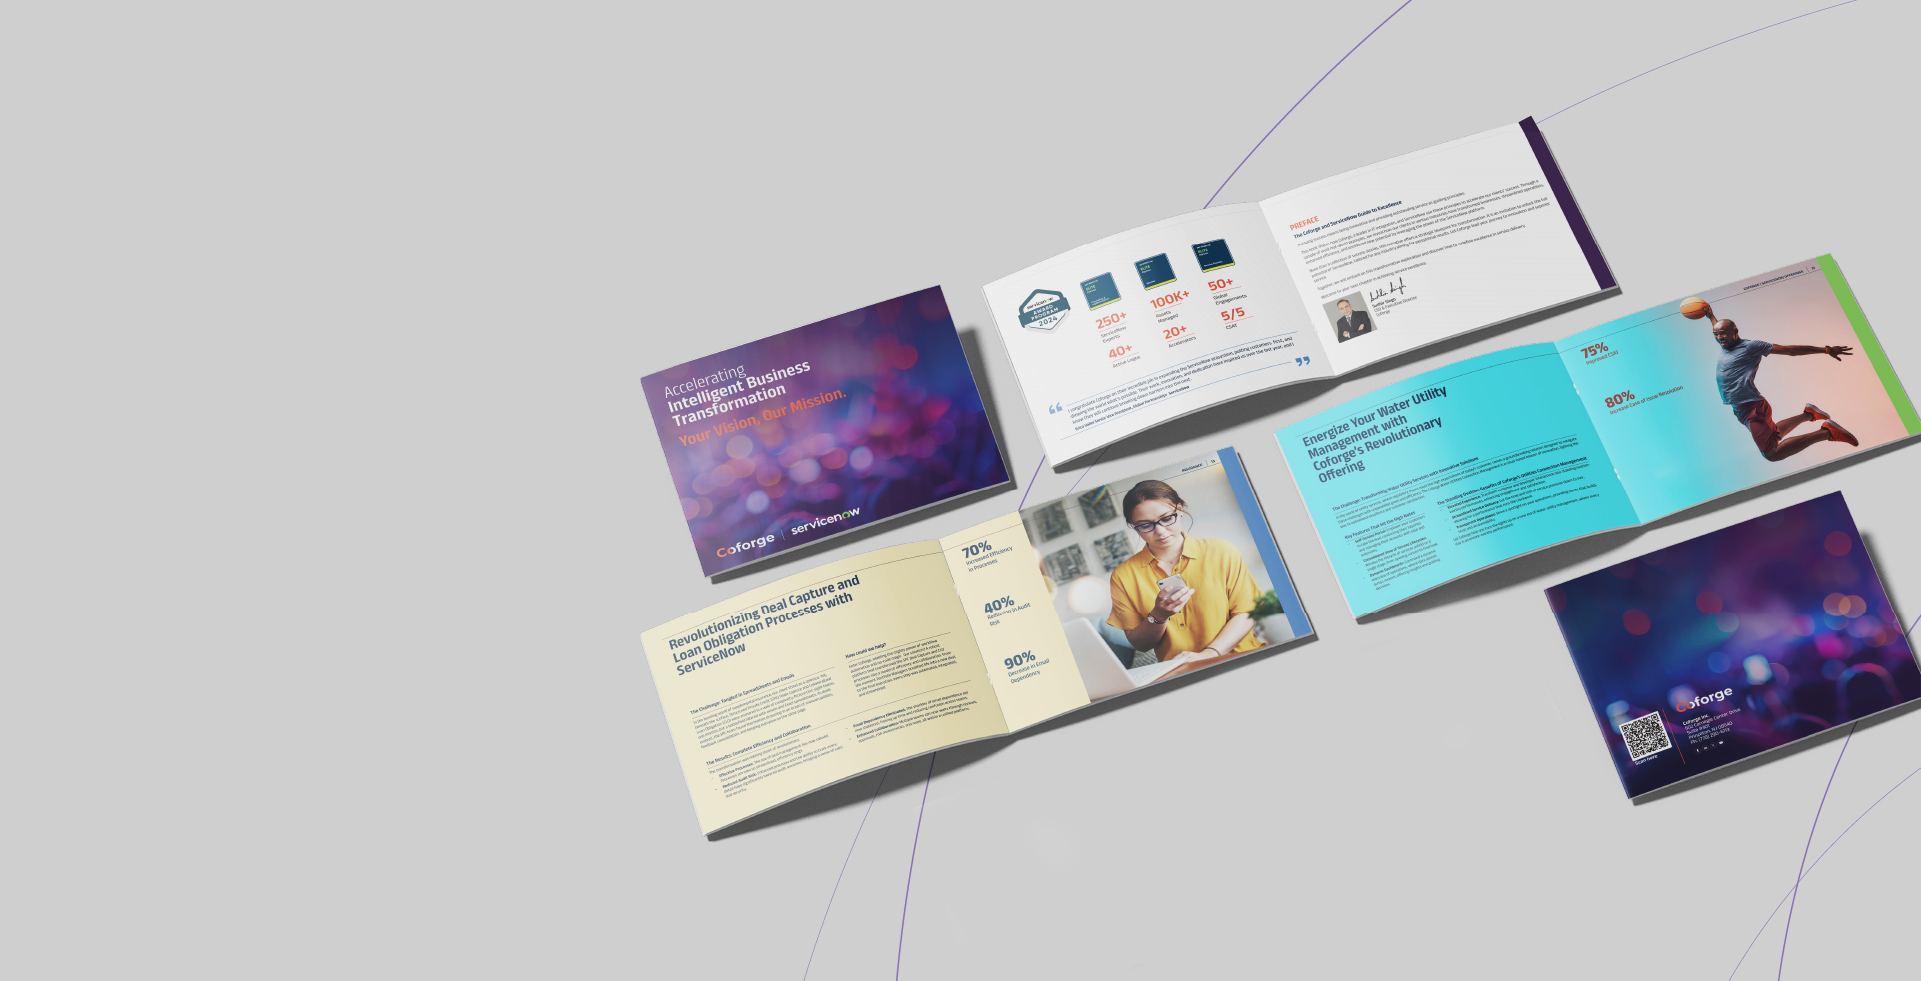 Explore the Coforge-ServiceNow Showcase Book and uncover our pioneering success stories!